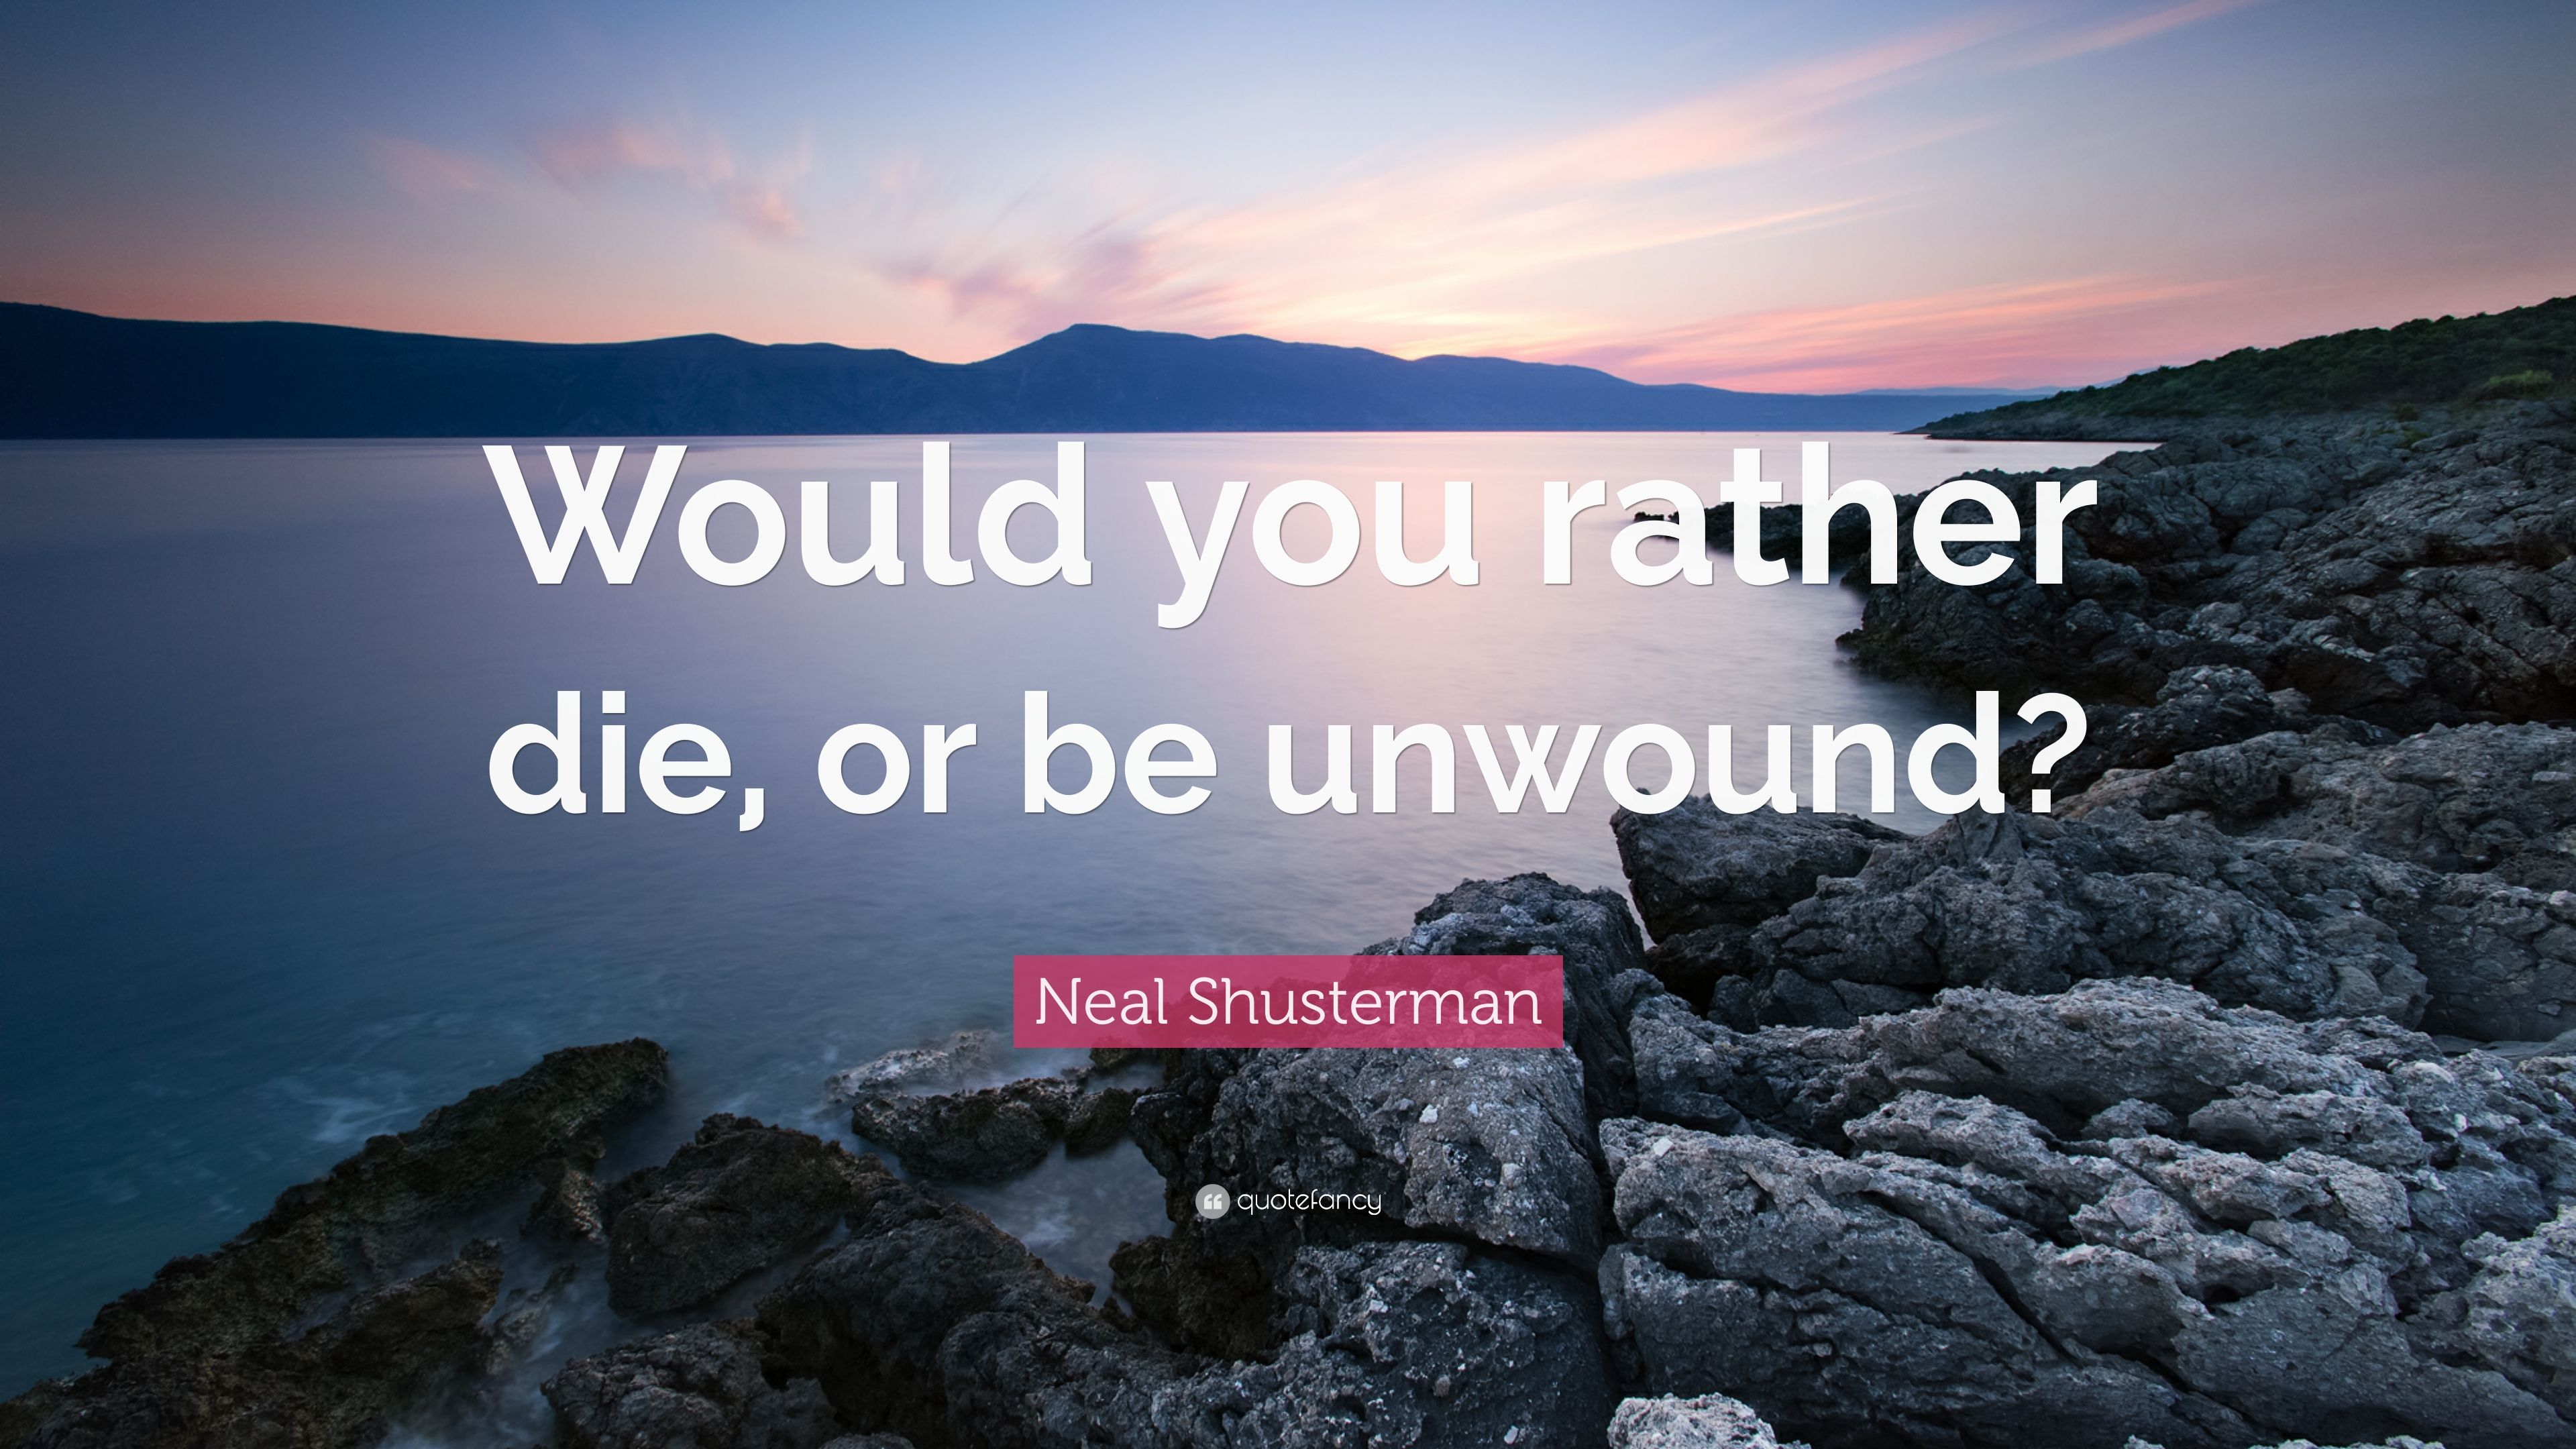 Neal Shusterman Quote: “Would you rather die, or be unwound?” (7 wallpaper)